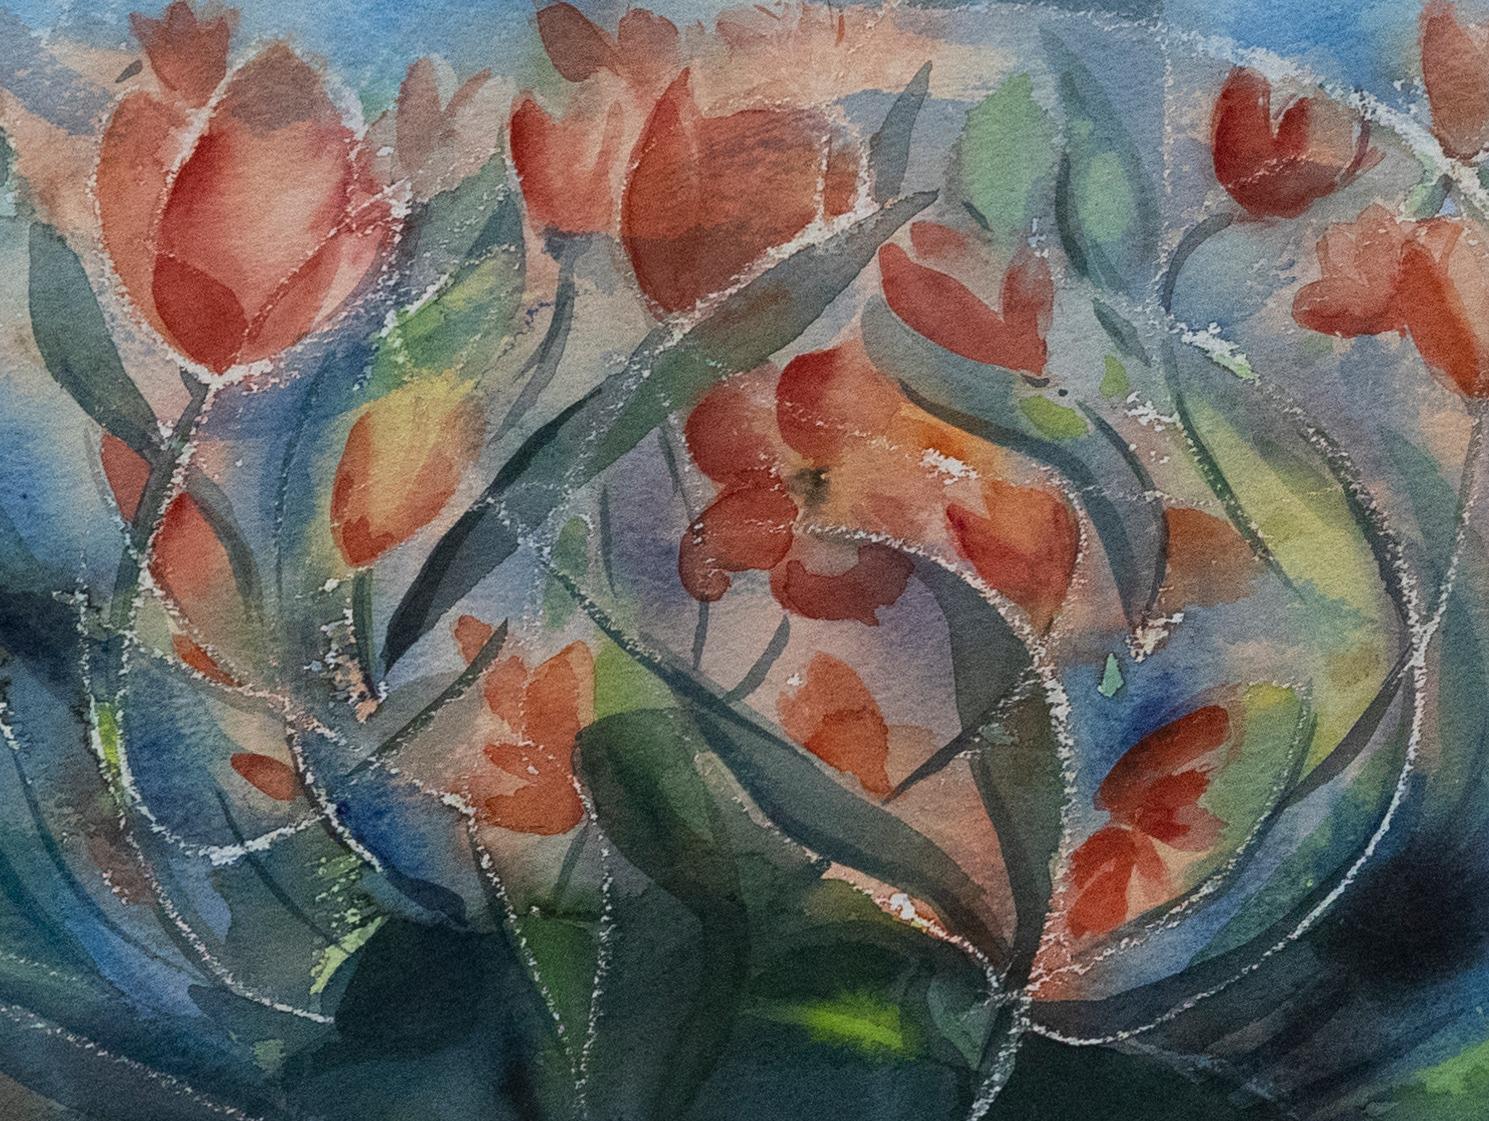 Framed Contemporary Watercolour - Wind Tossed Tulips - Art by Unknown